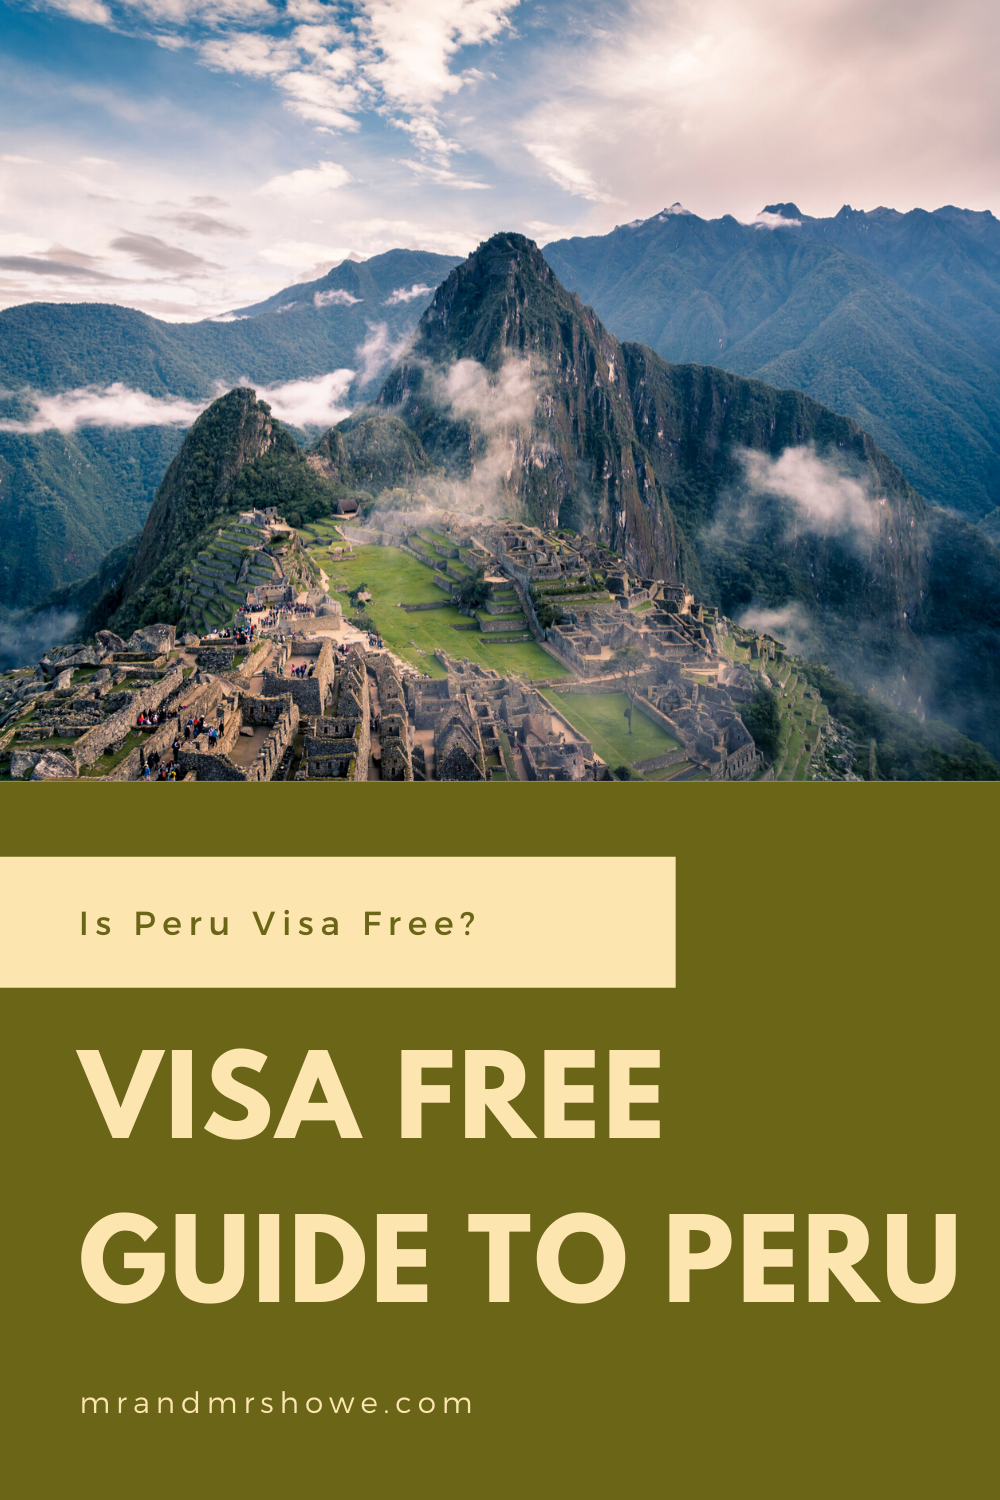 Visa Free Guide to Peru for Philippines Passport.png